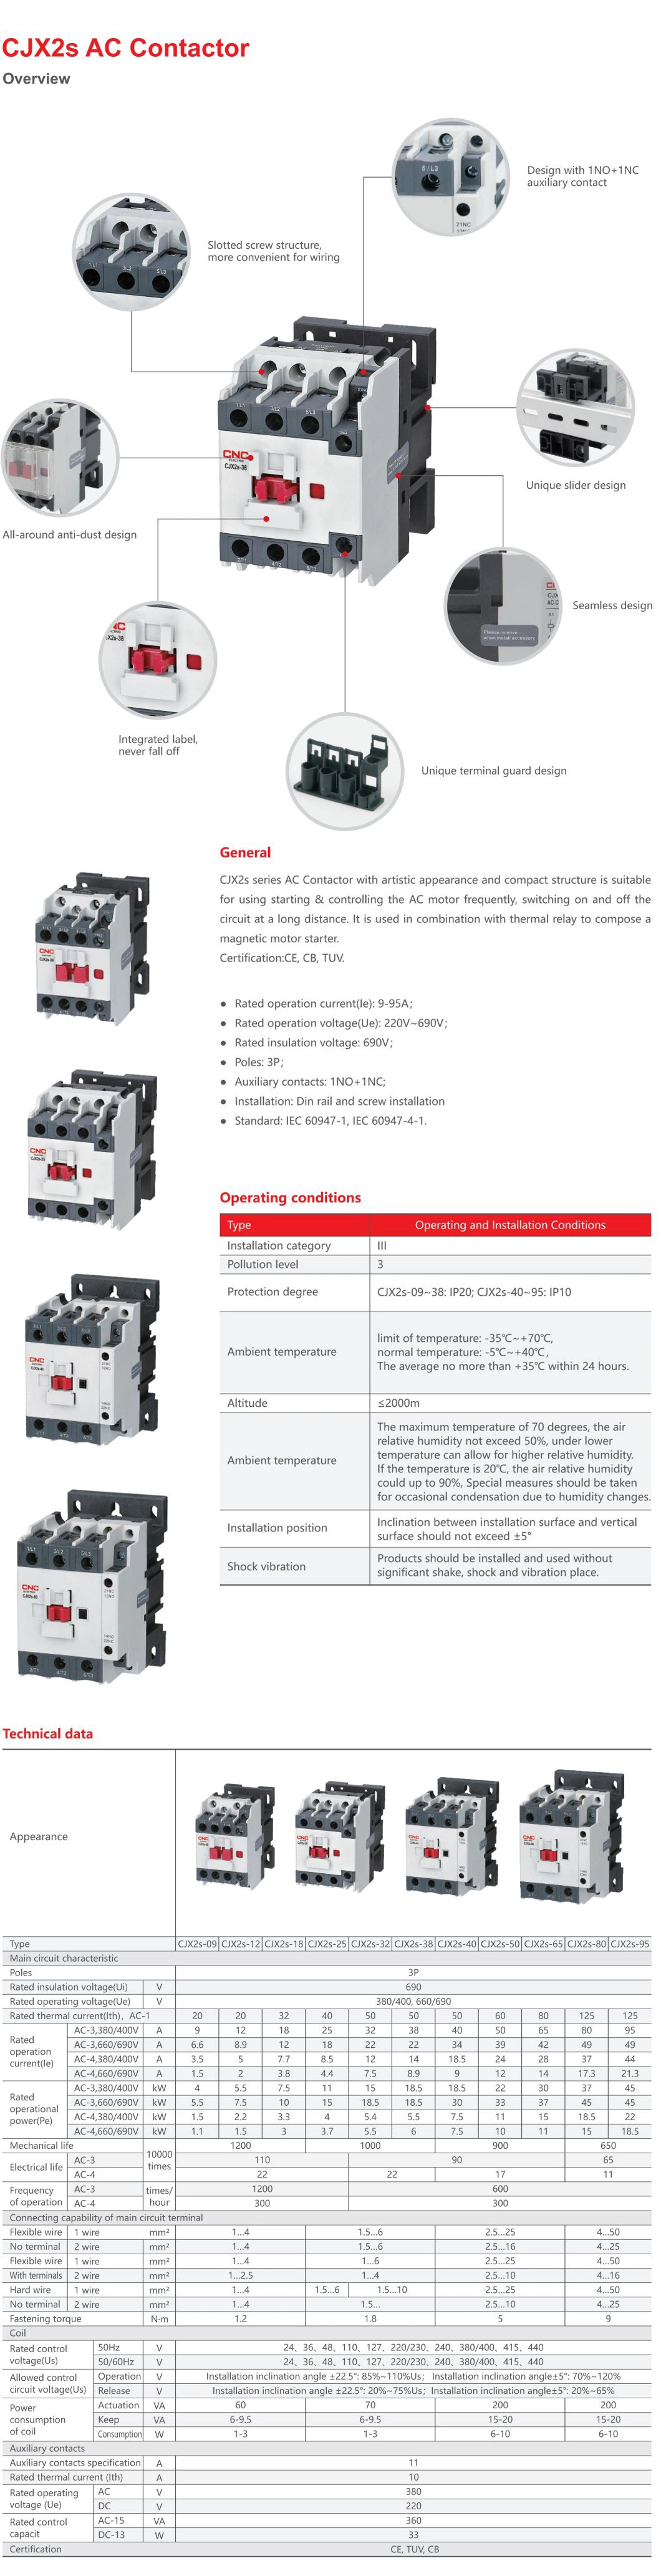 CNC Cjx2s Series AC 12A 18A 3 Pole Contactor 1no+1no 12AMP 3p 380V 220V 50/60 Hz 3 Phase Magnetic Contactor with TUV Certificate